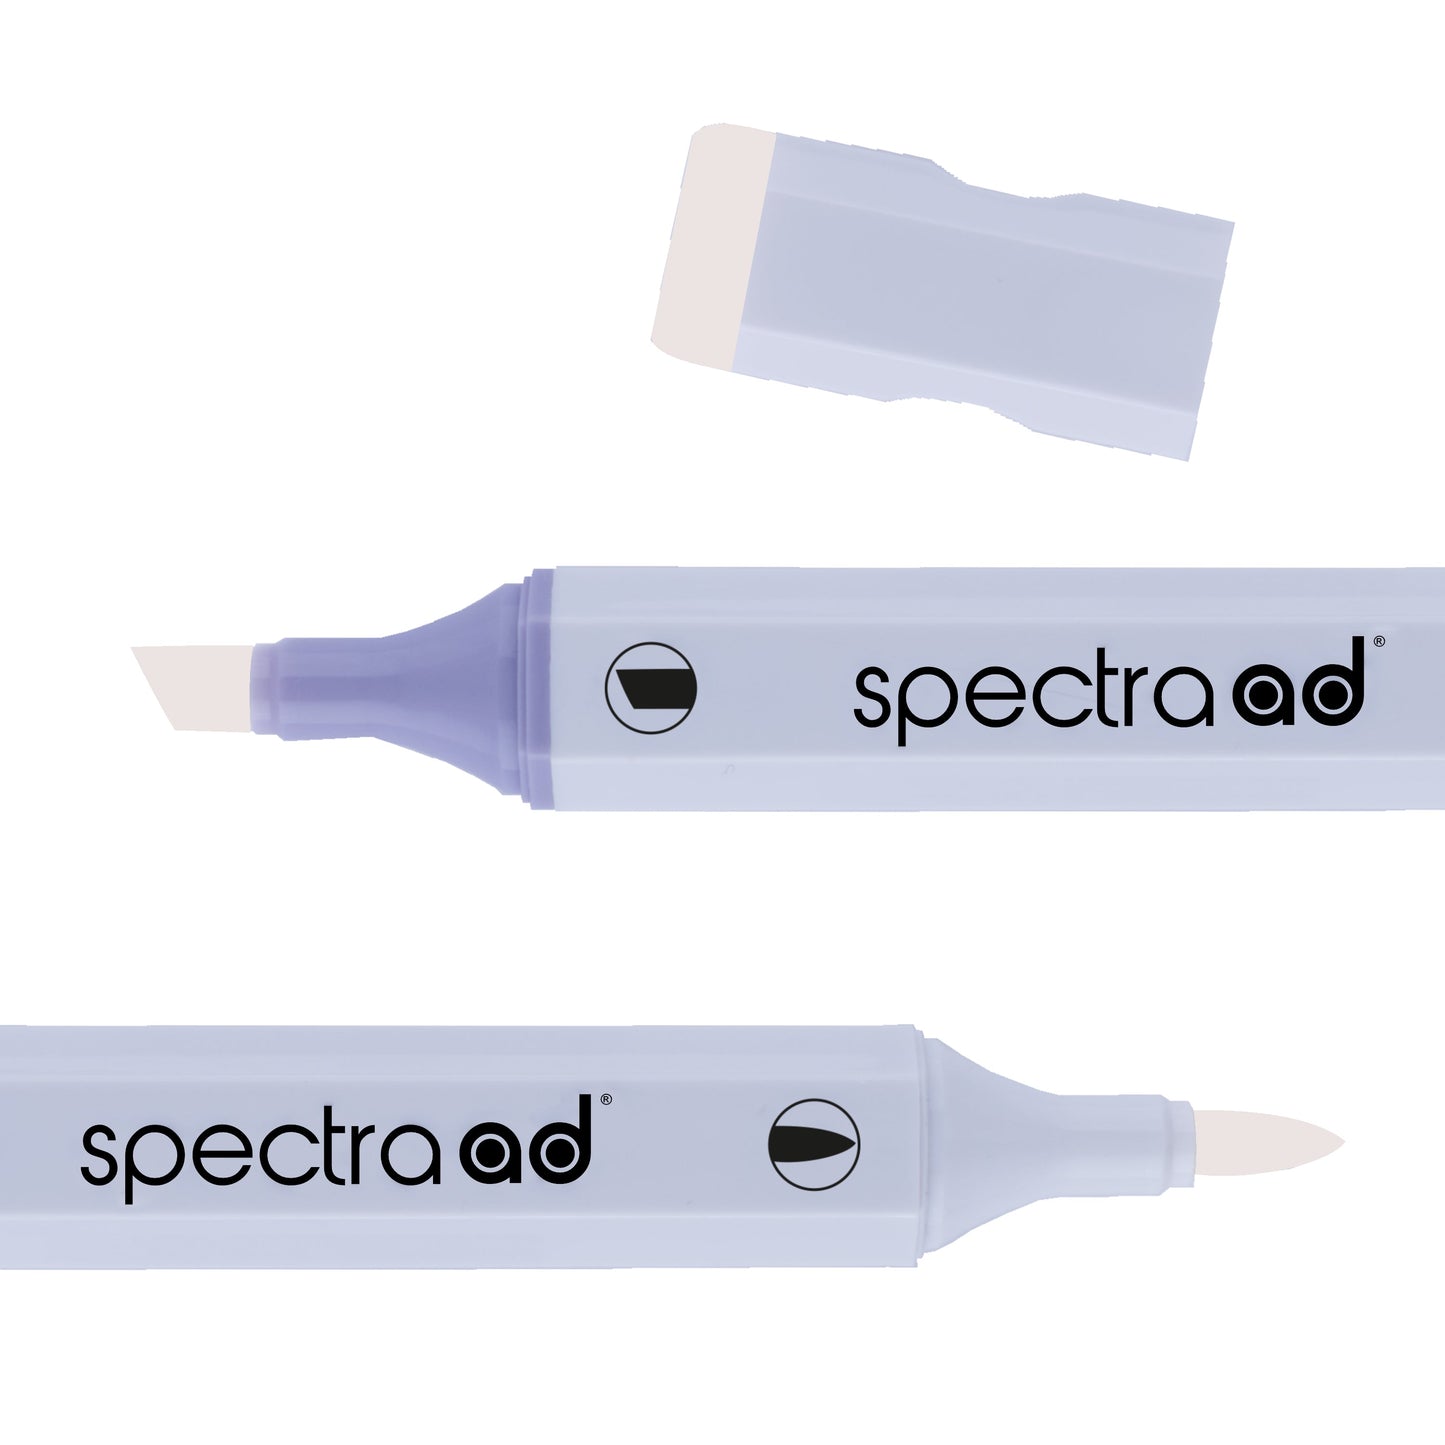 093 - Putty - Spectra AD Marker